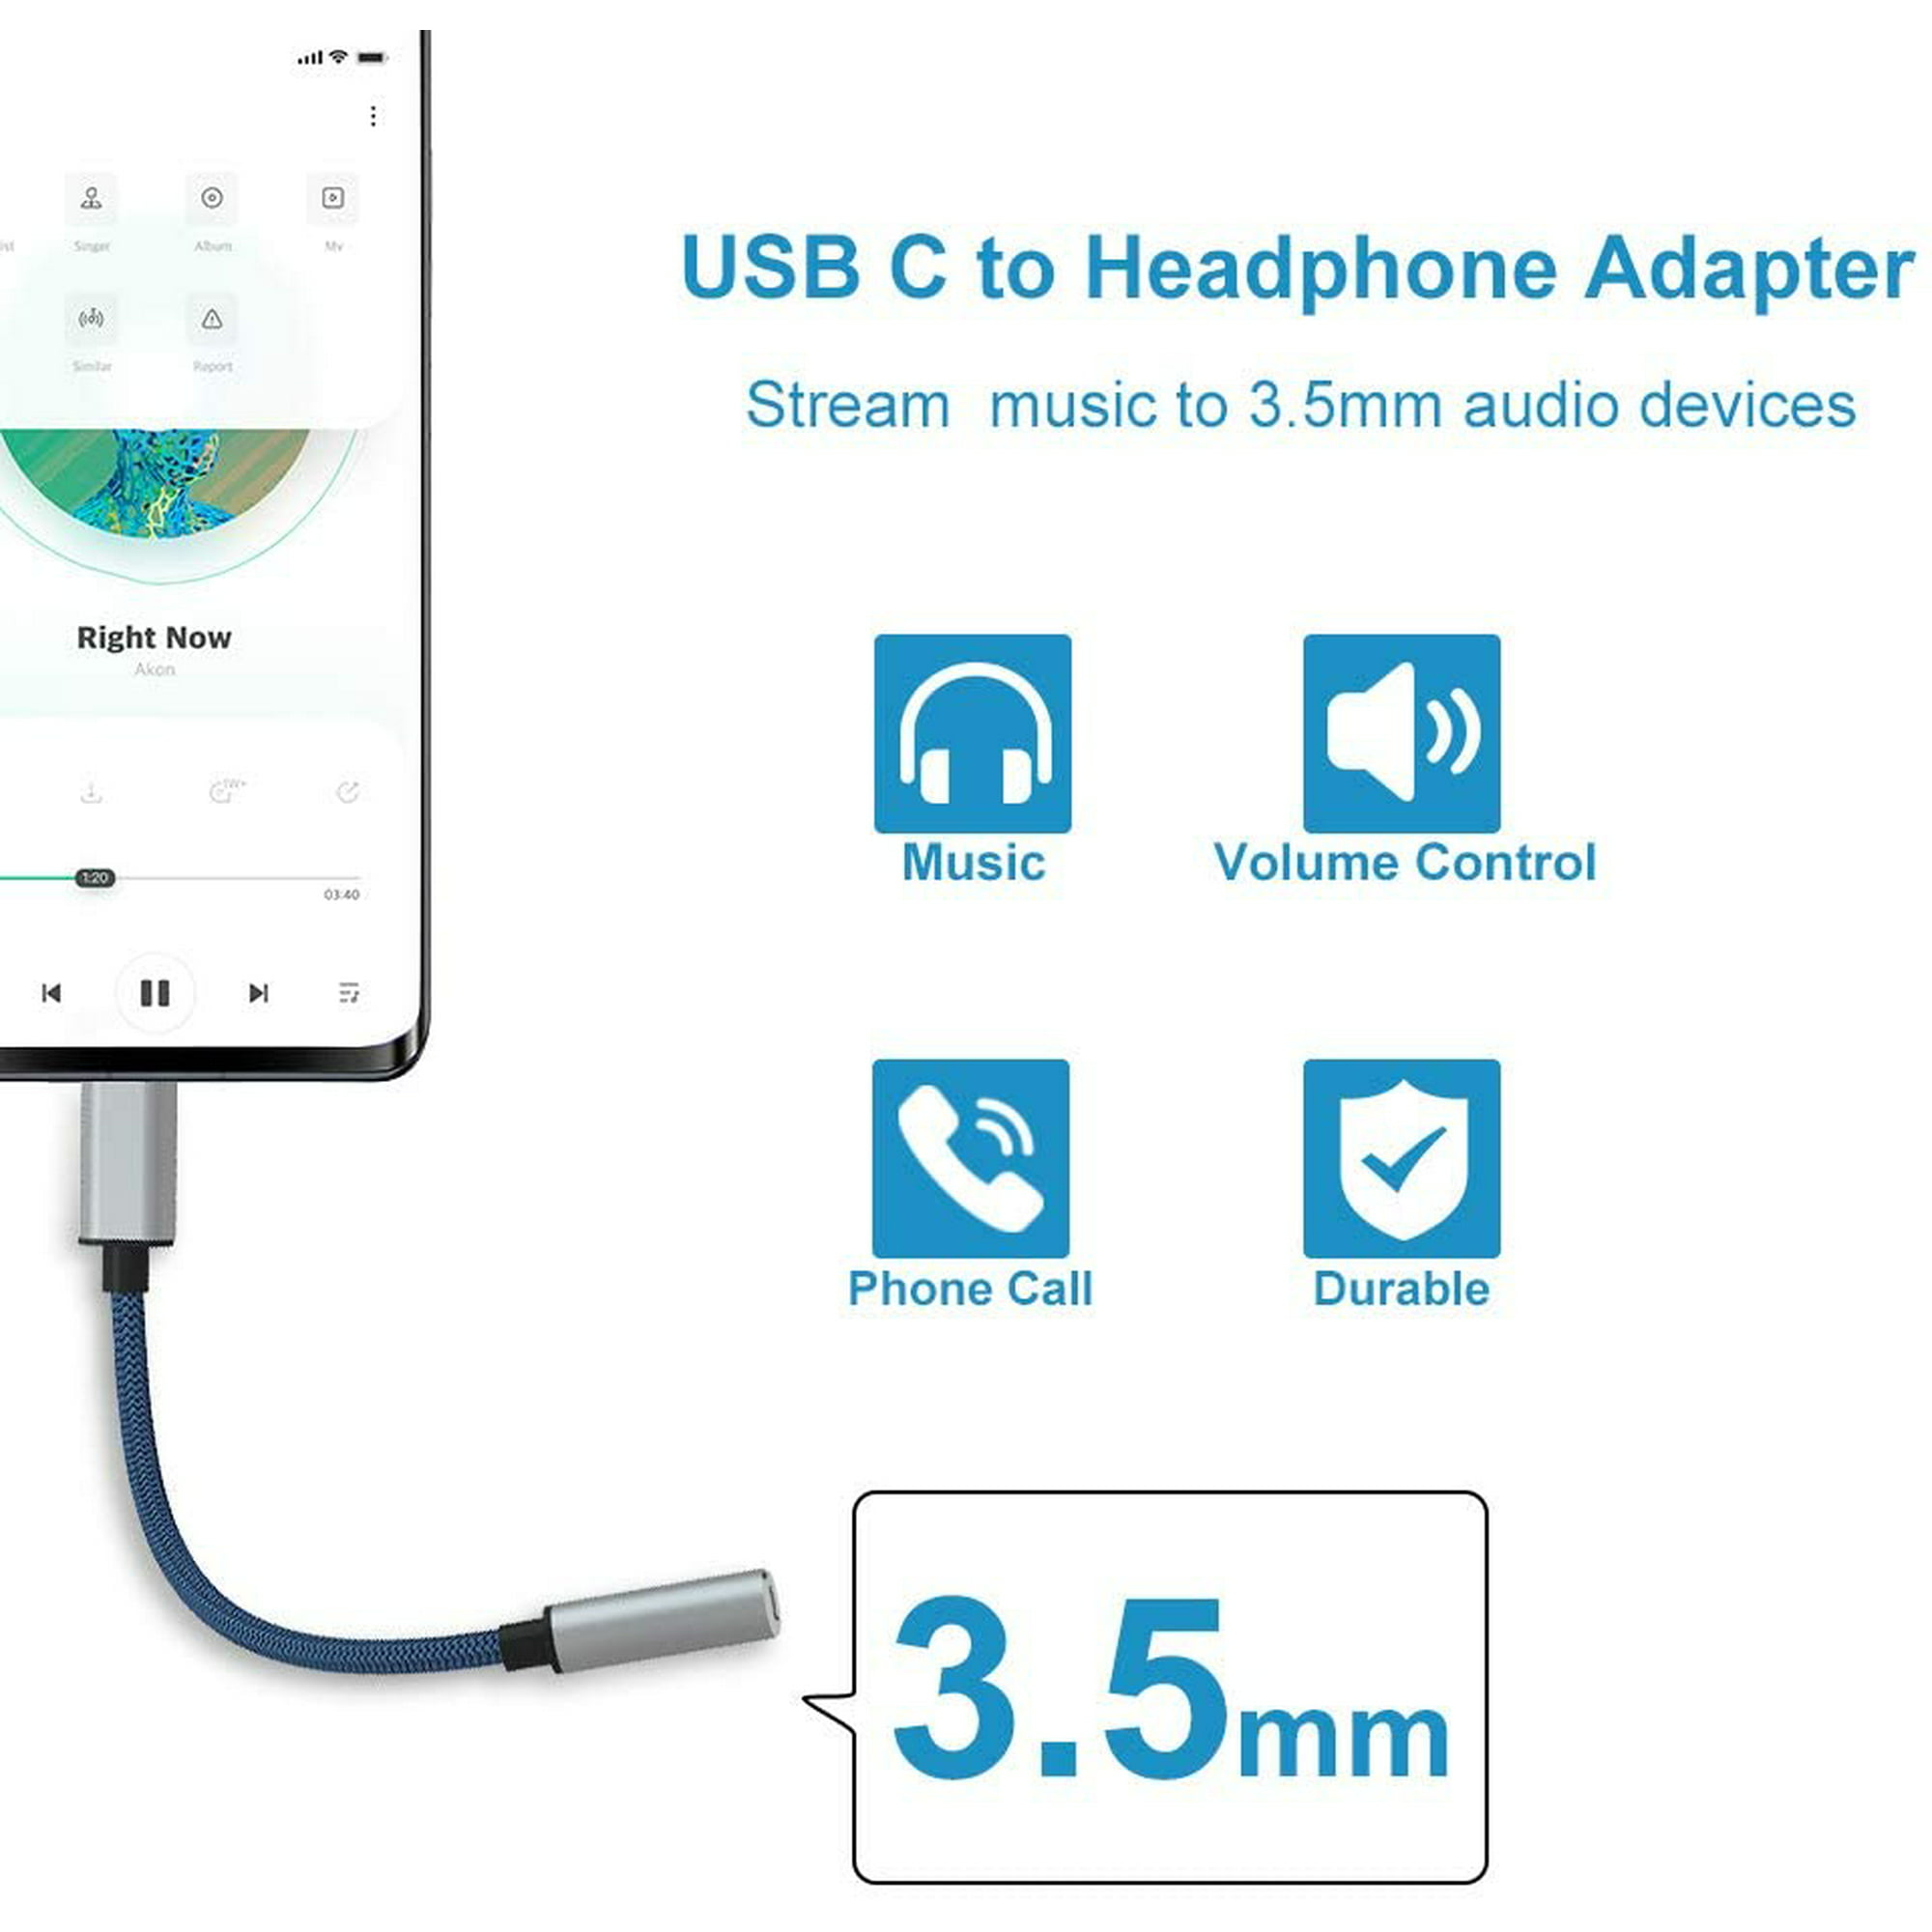 USB C to 3.5mm OnePlus 7T Pro Headphone Jack Adapter OnePlus 7T 7 Pro 6T YUANBAI USB Type C to 3.5mm Aux Audio Adapter DAC USB C Headphone Adapter for Pixel 4 3 XL 2XL New iPad Pro Samsung Note 10 